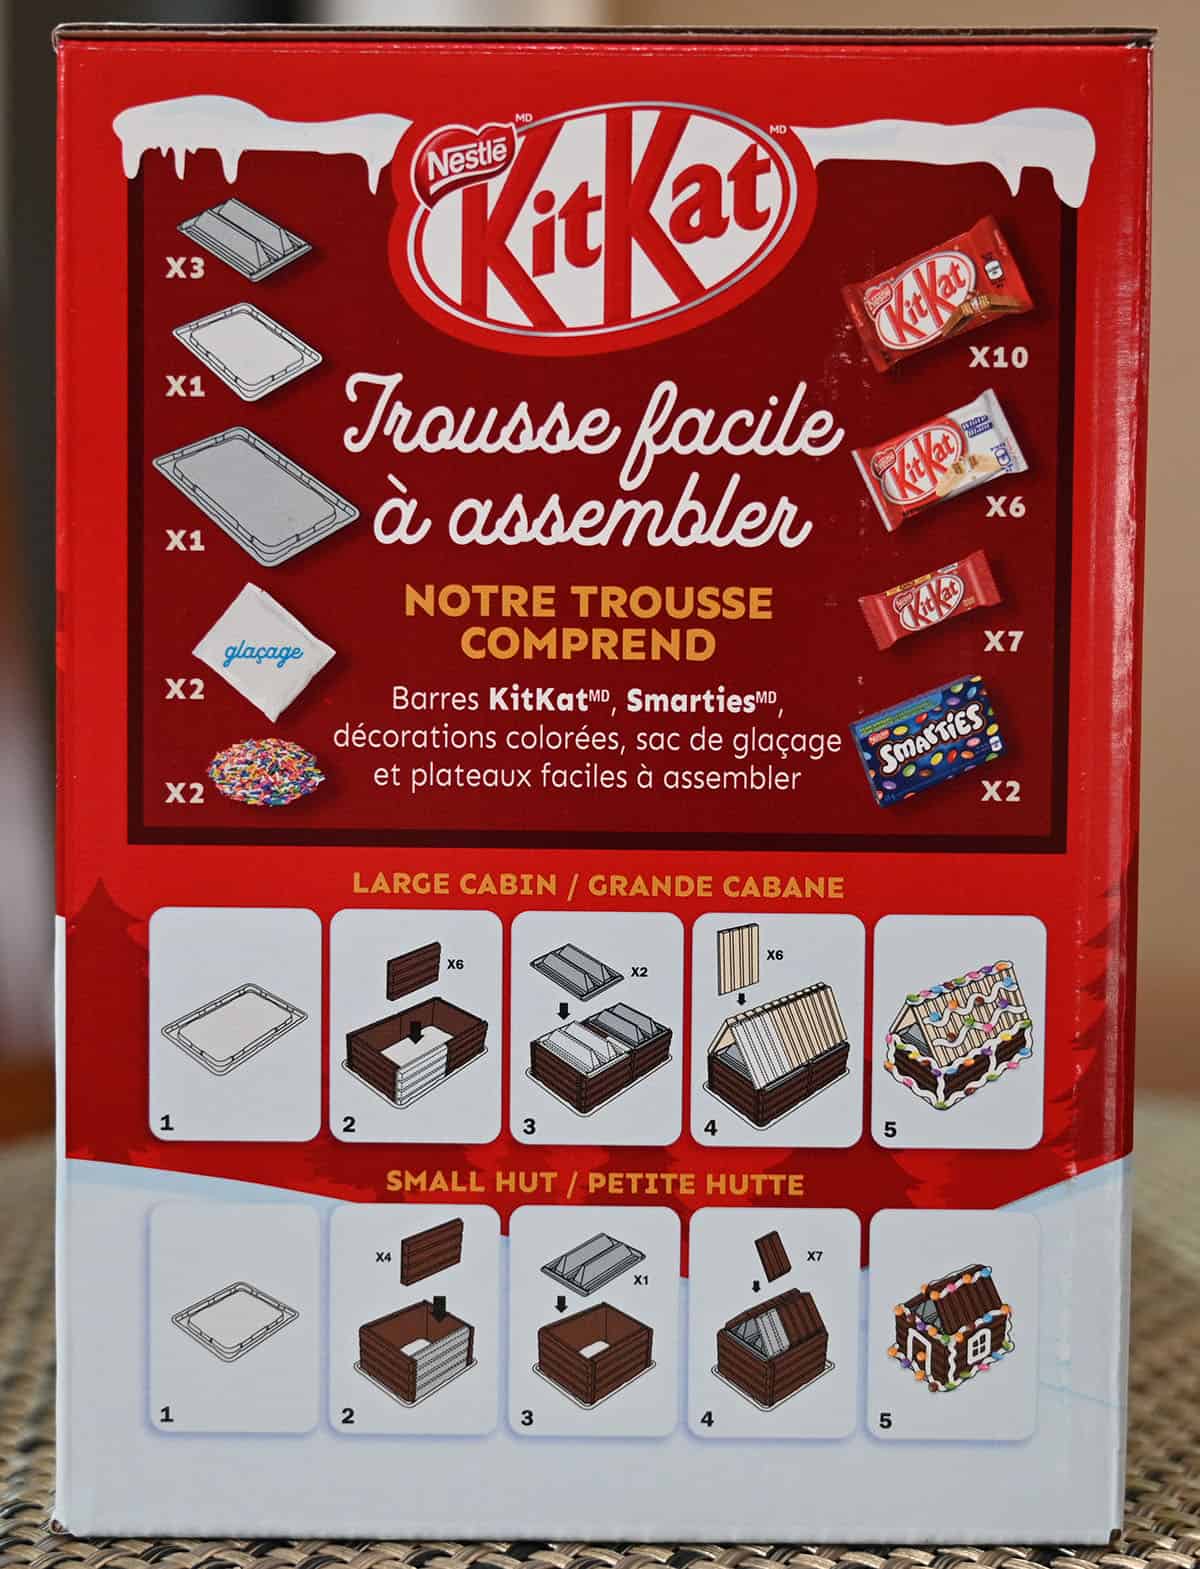 Image of the box label that shows everything that's supposed to be included in the kit and how to build it.